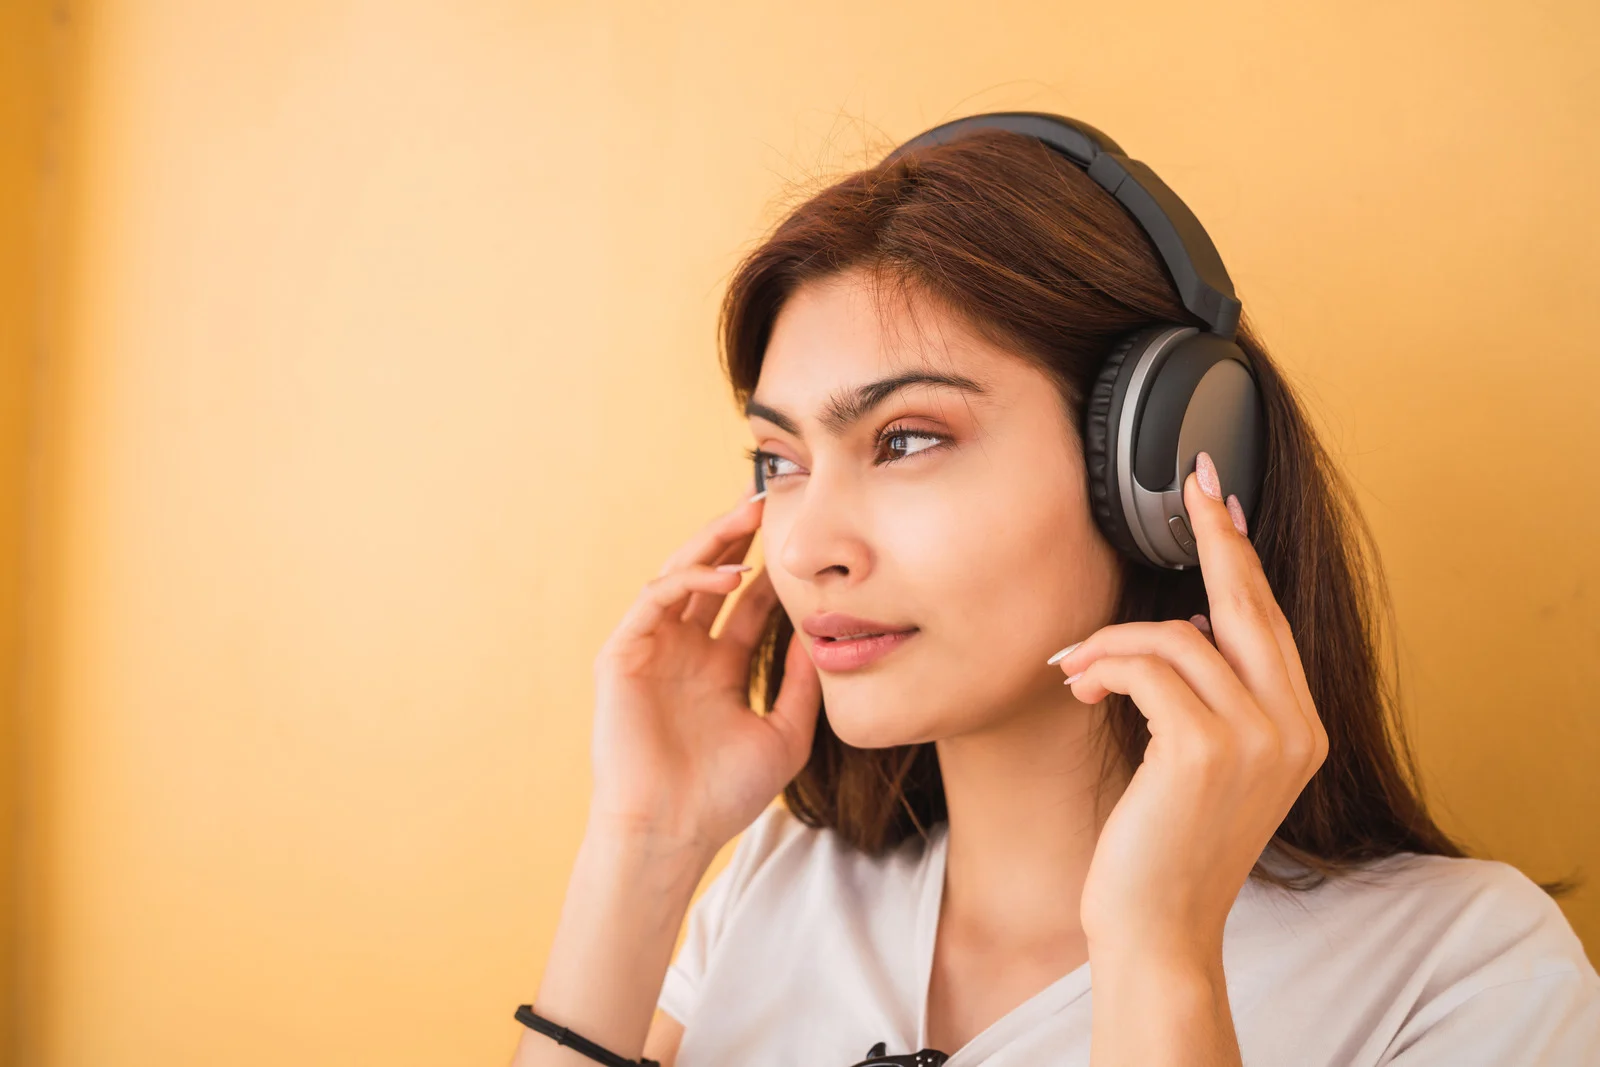 Young Woman Listening to Music Using Headphones